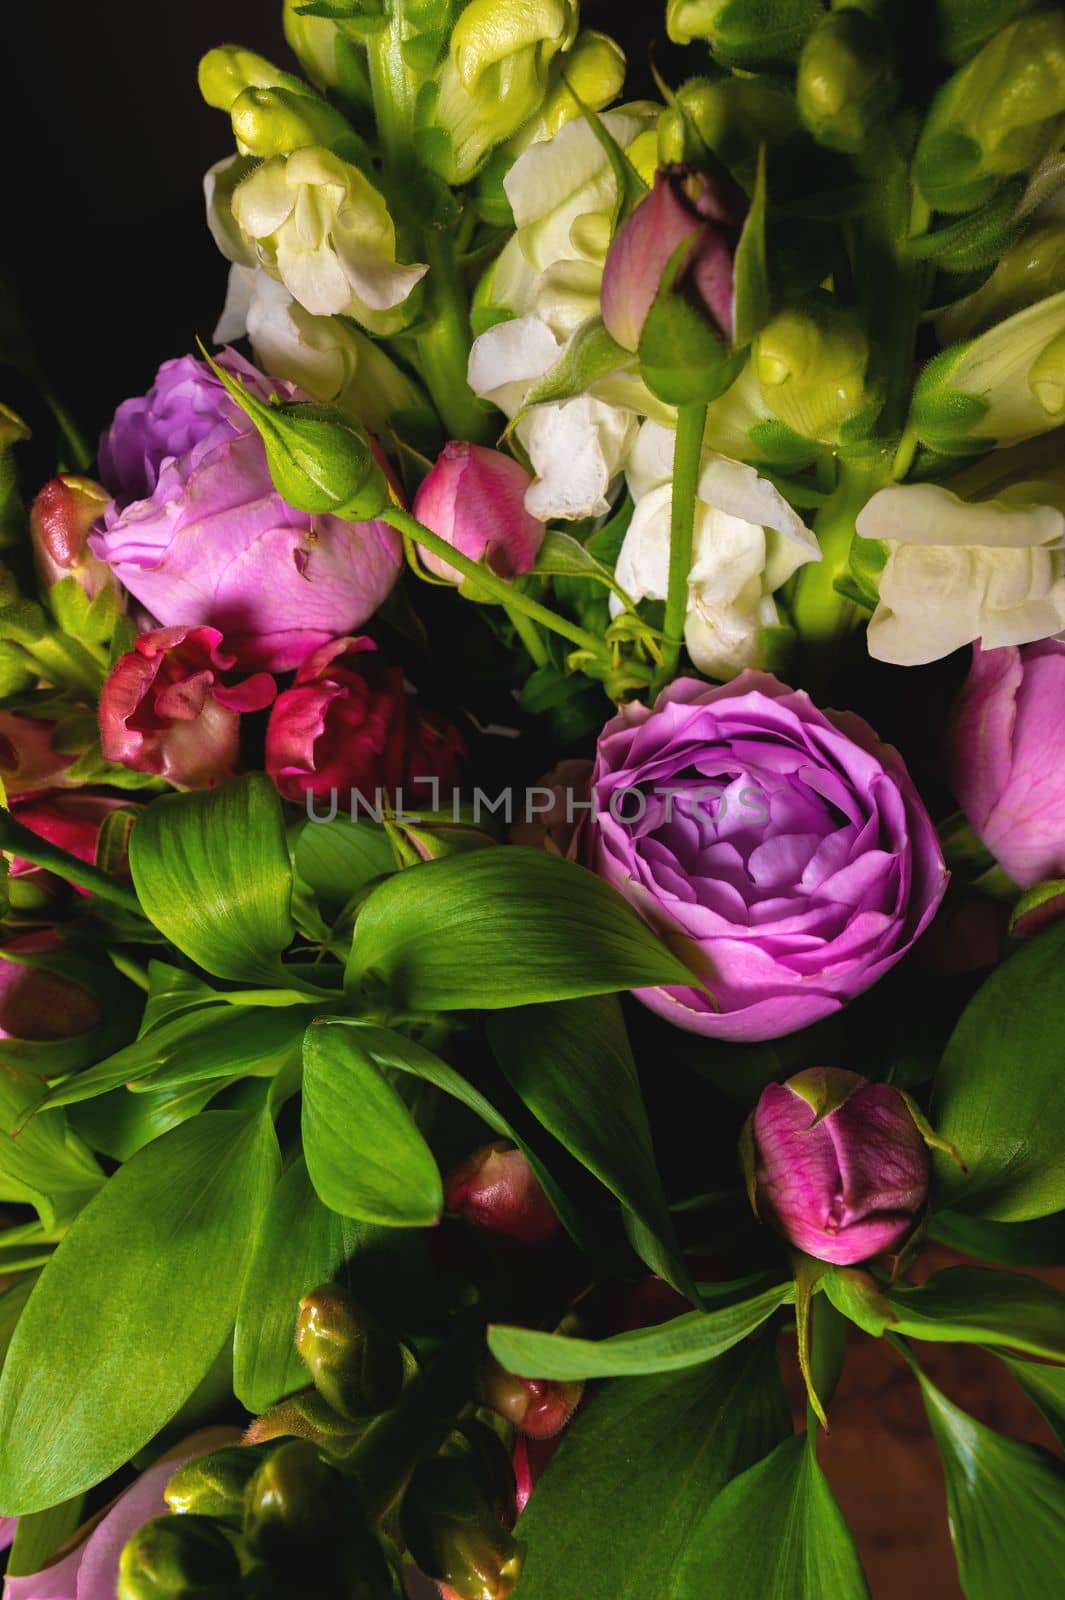 Pink peony roses with green foliage, close-up of a bouquet, macro shot on a dark background.